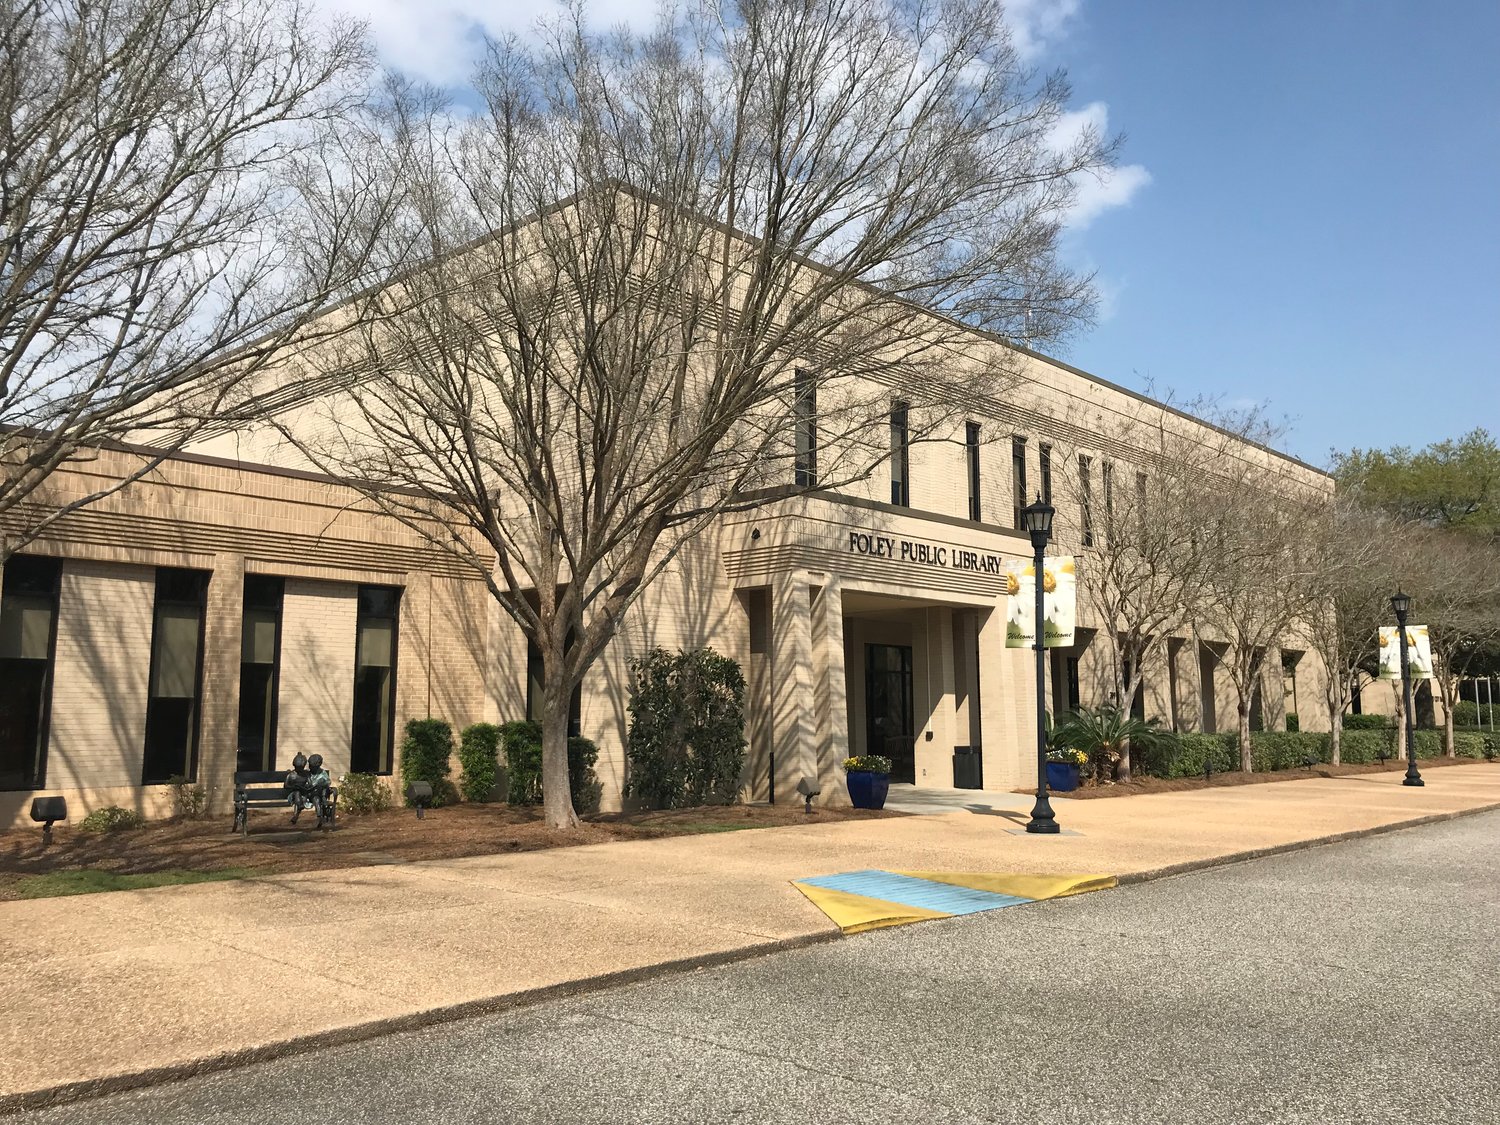 The city of Foley has offered Baldwin County space in the public library as a location for the Baldwin County Library Cooperative. The city would lease about 1,000 square feet to the county at no cost.